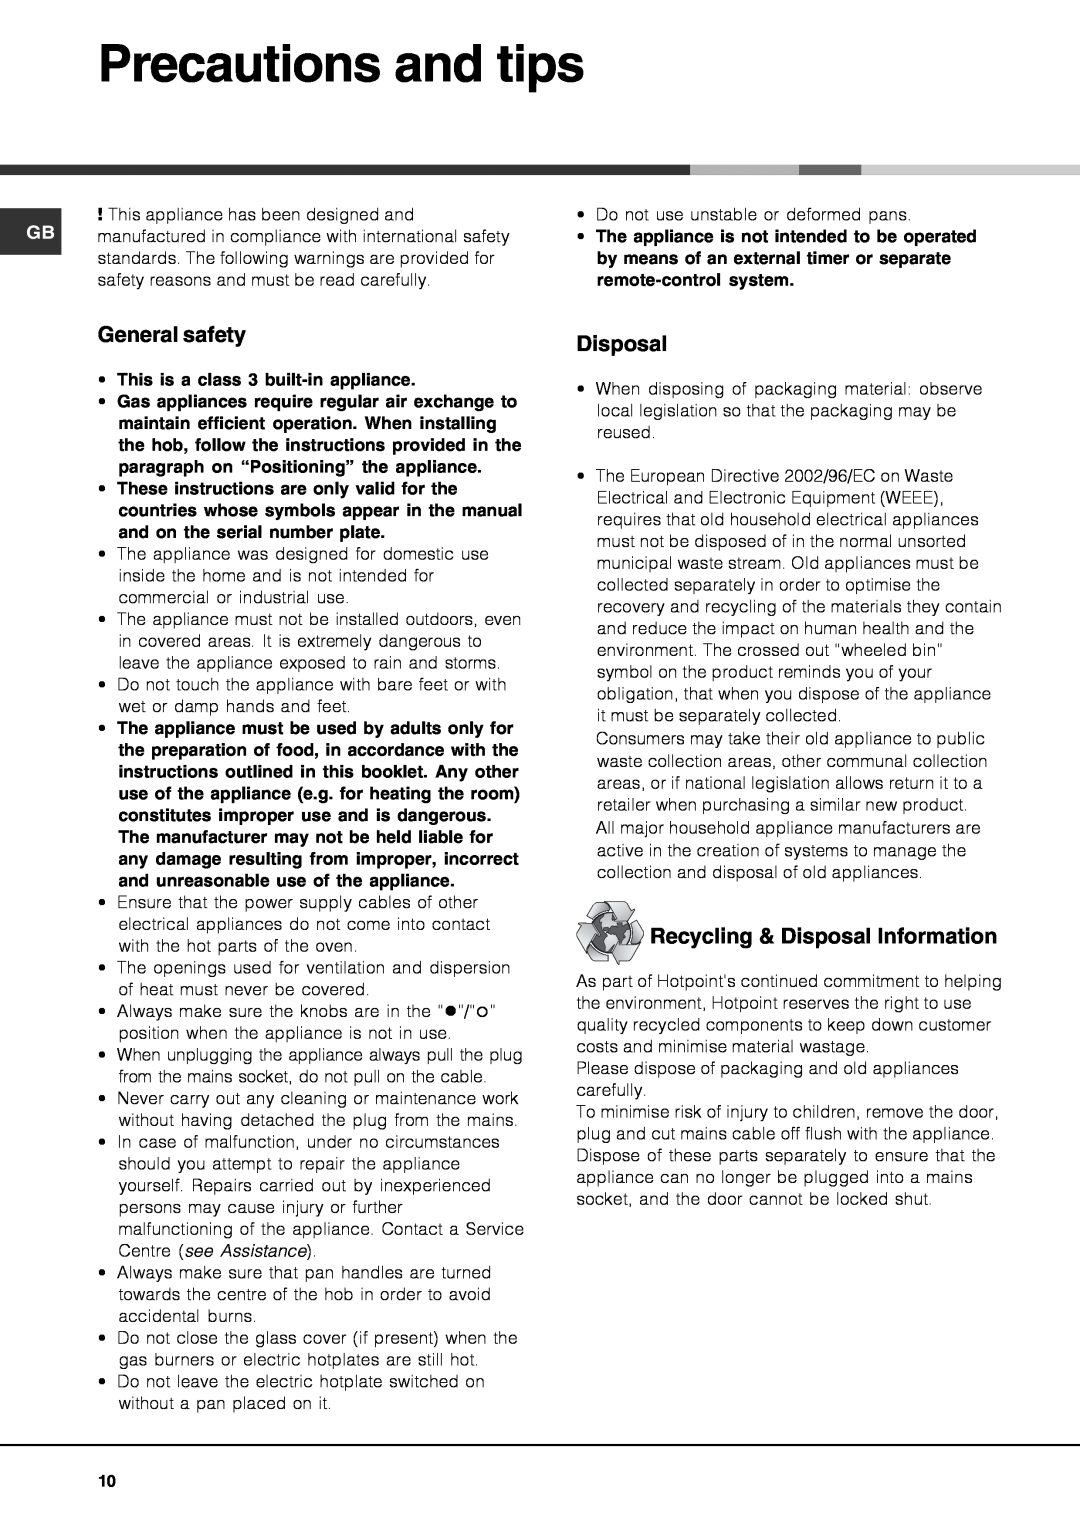 Hotpoint G750, G760 operating instructions Precautions and tips, General safety, Recycling & Disposal Information 